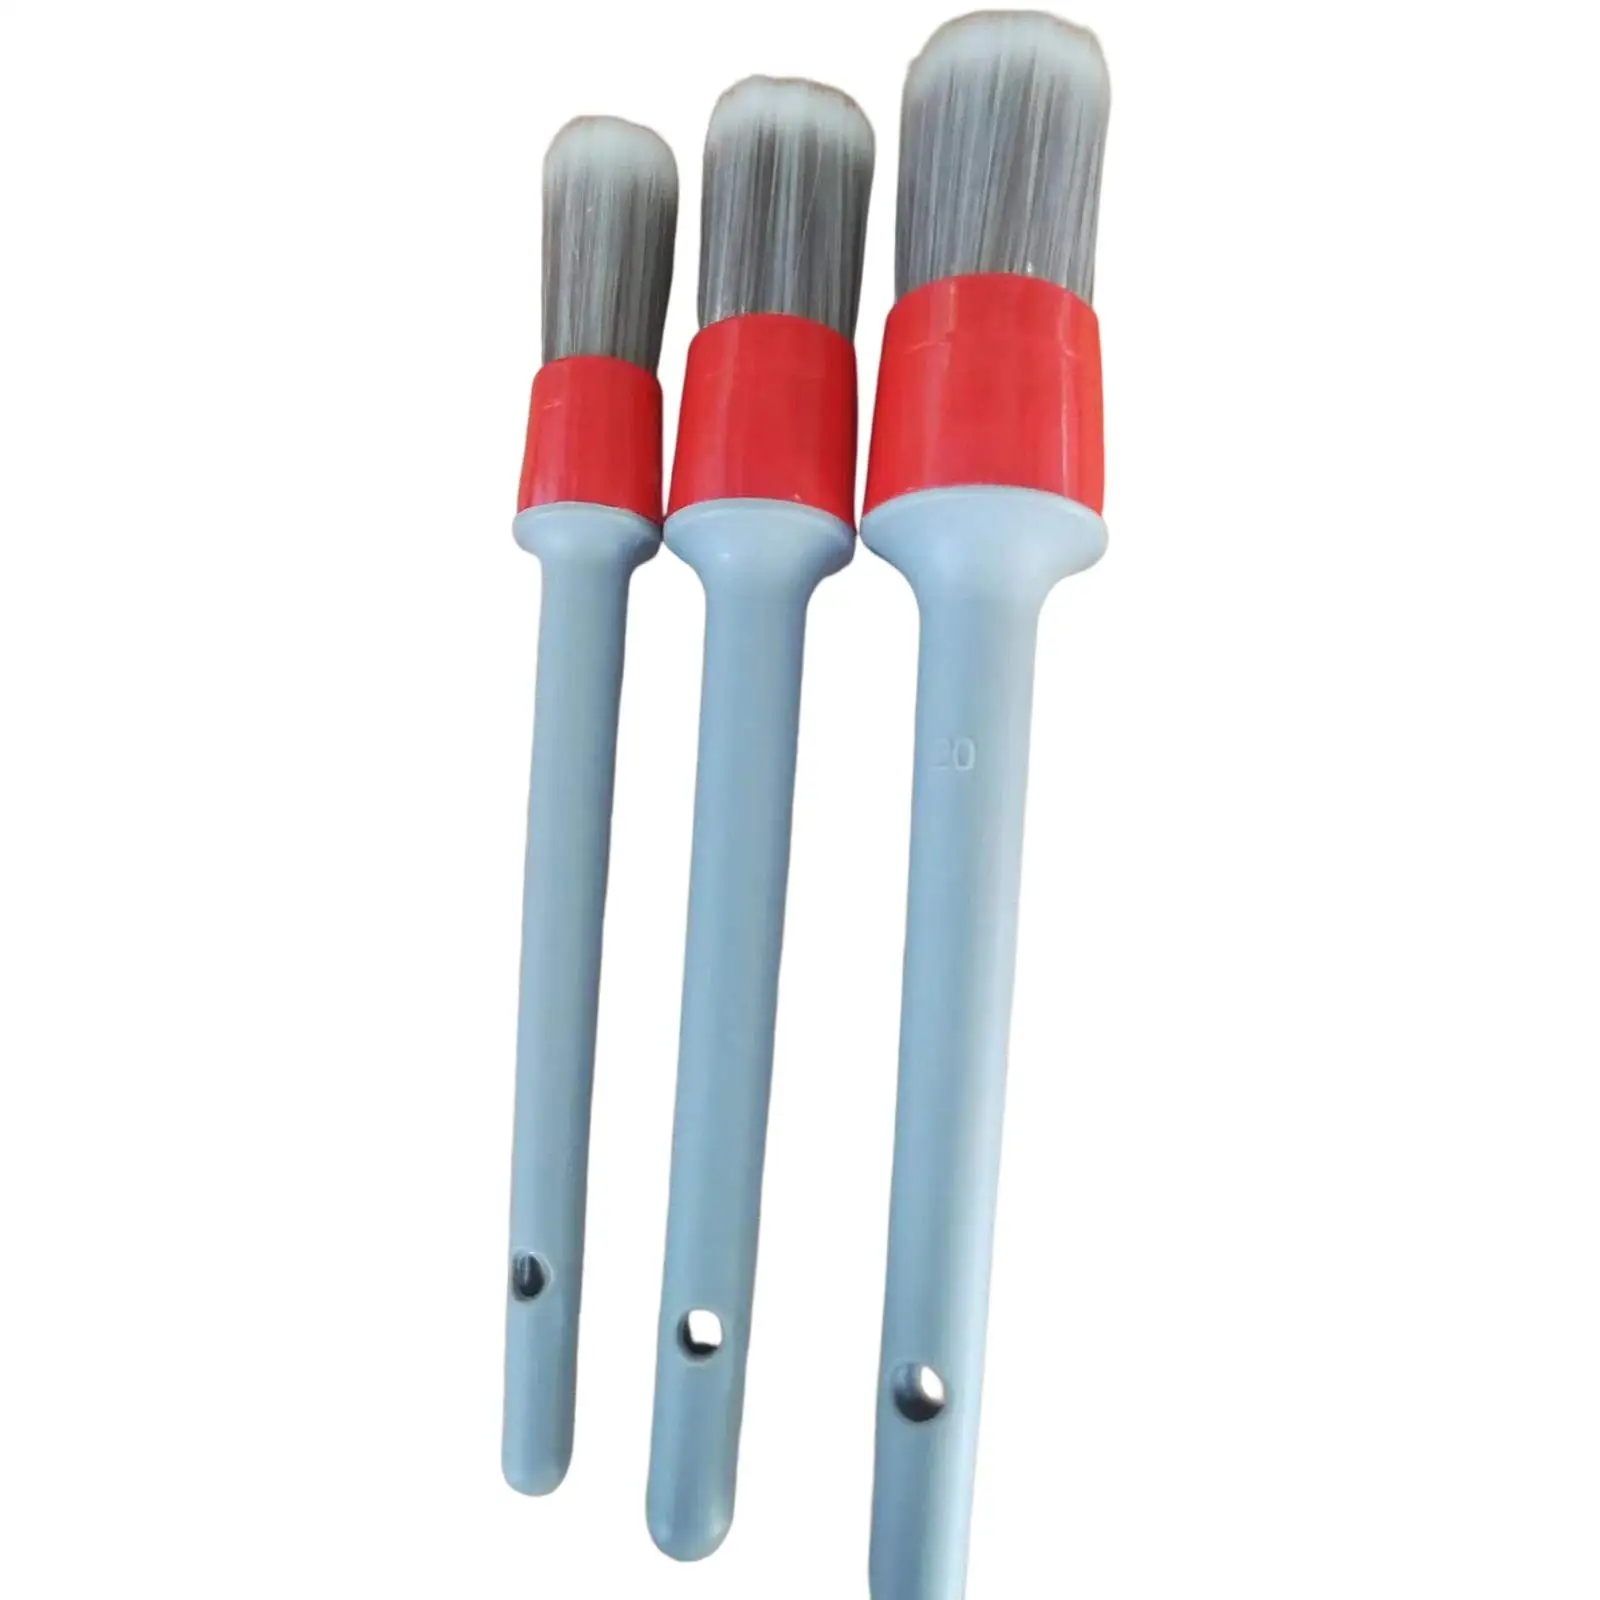 Car Detailing Brushes Set with Handle for Cleaning Interior Wheel